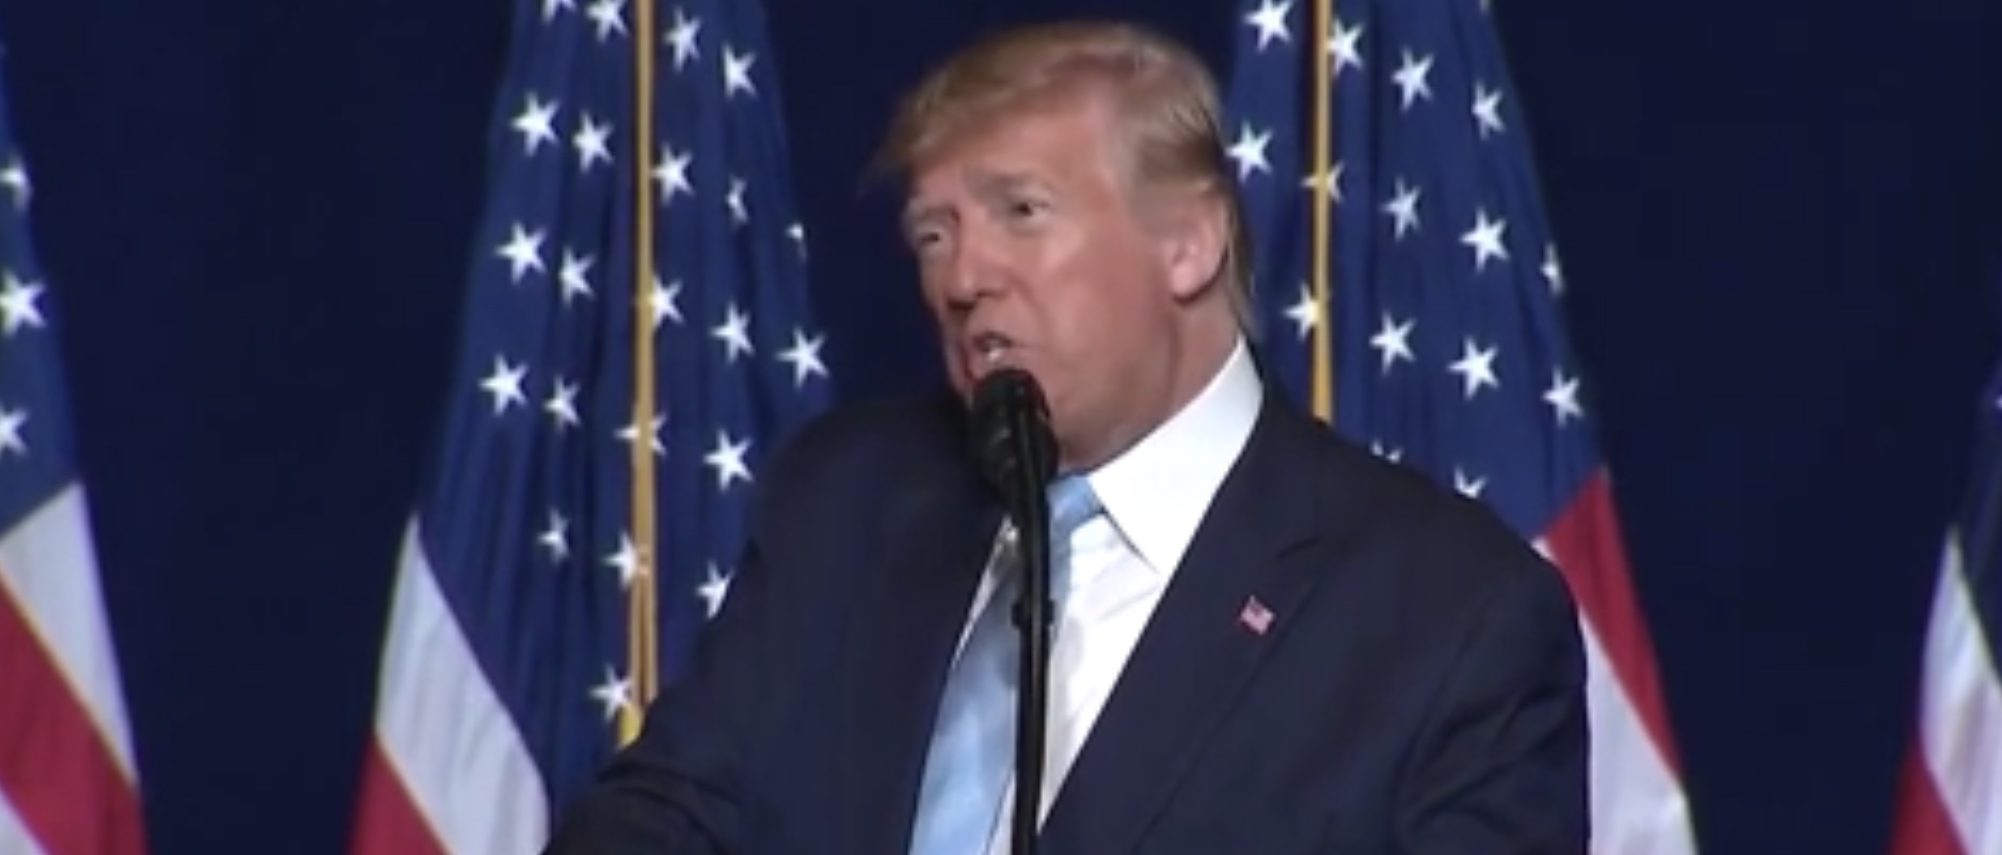 President Donald Trump helps launch “Evangelicals for Trump” at a Miami, Florida event, Jan. 3, 2020. YouTube screenshot.